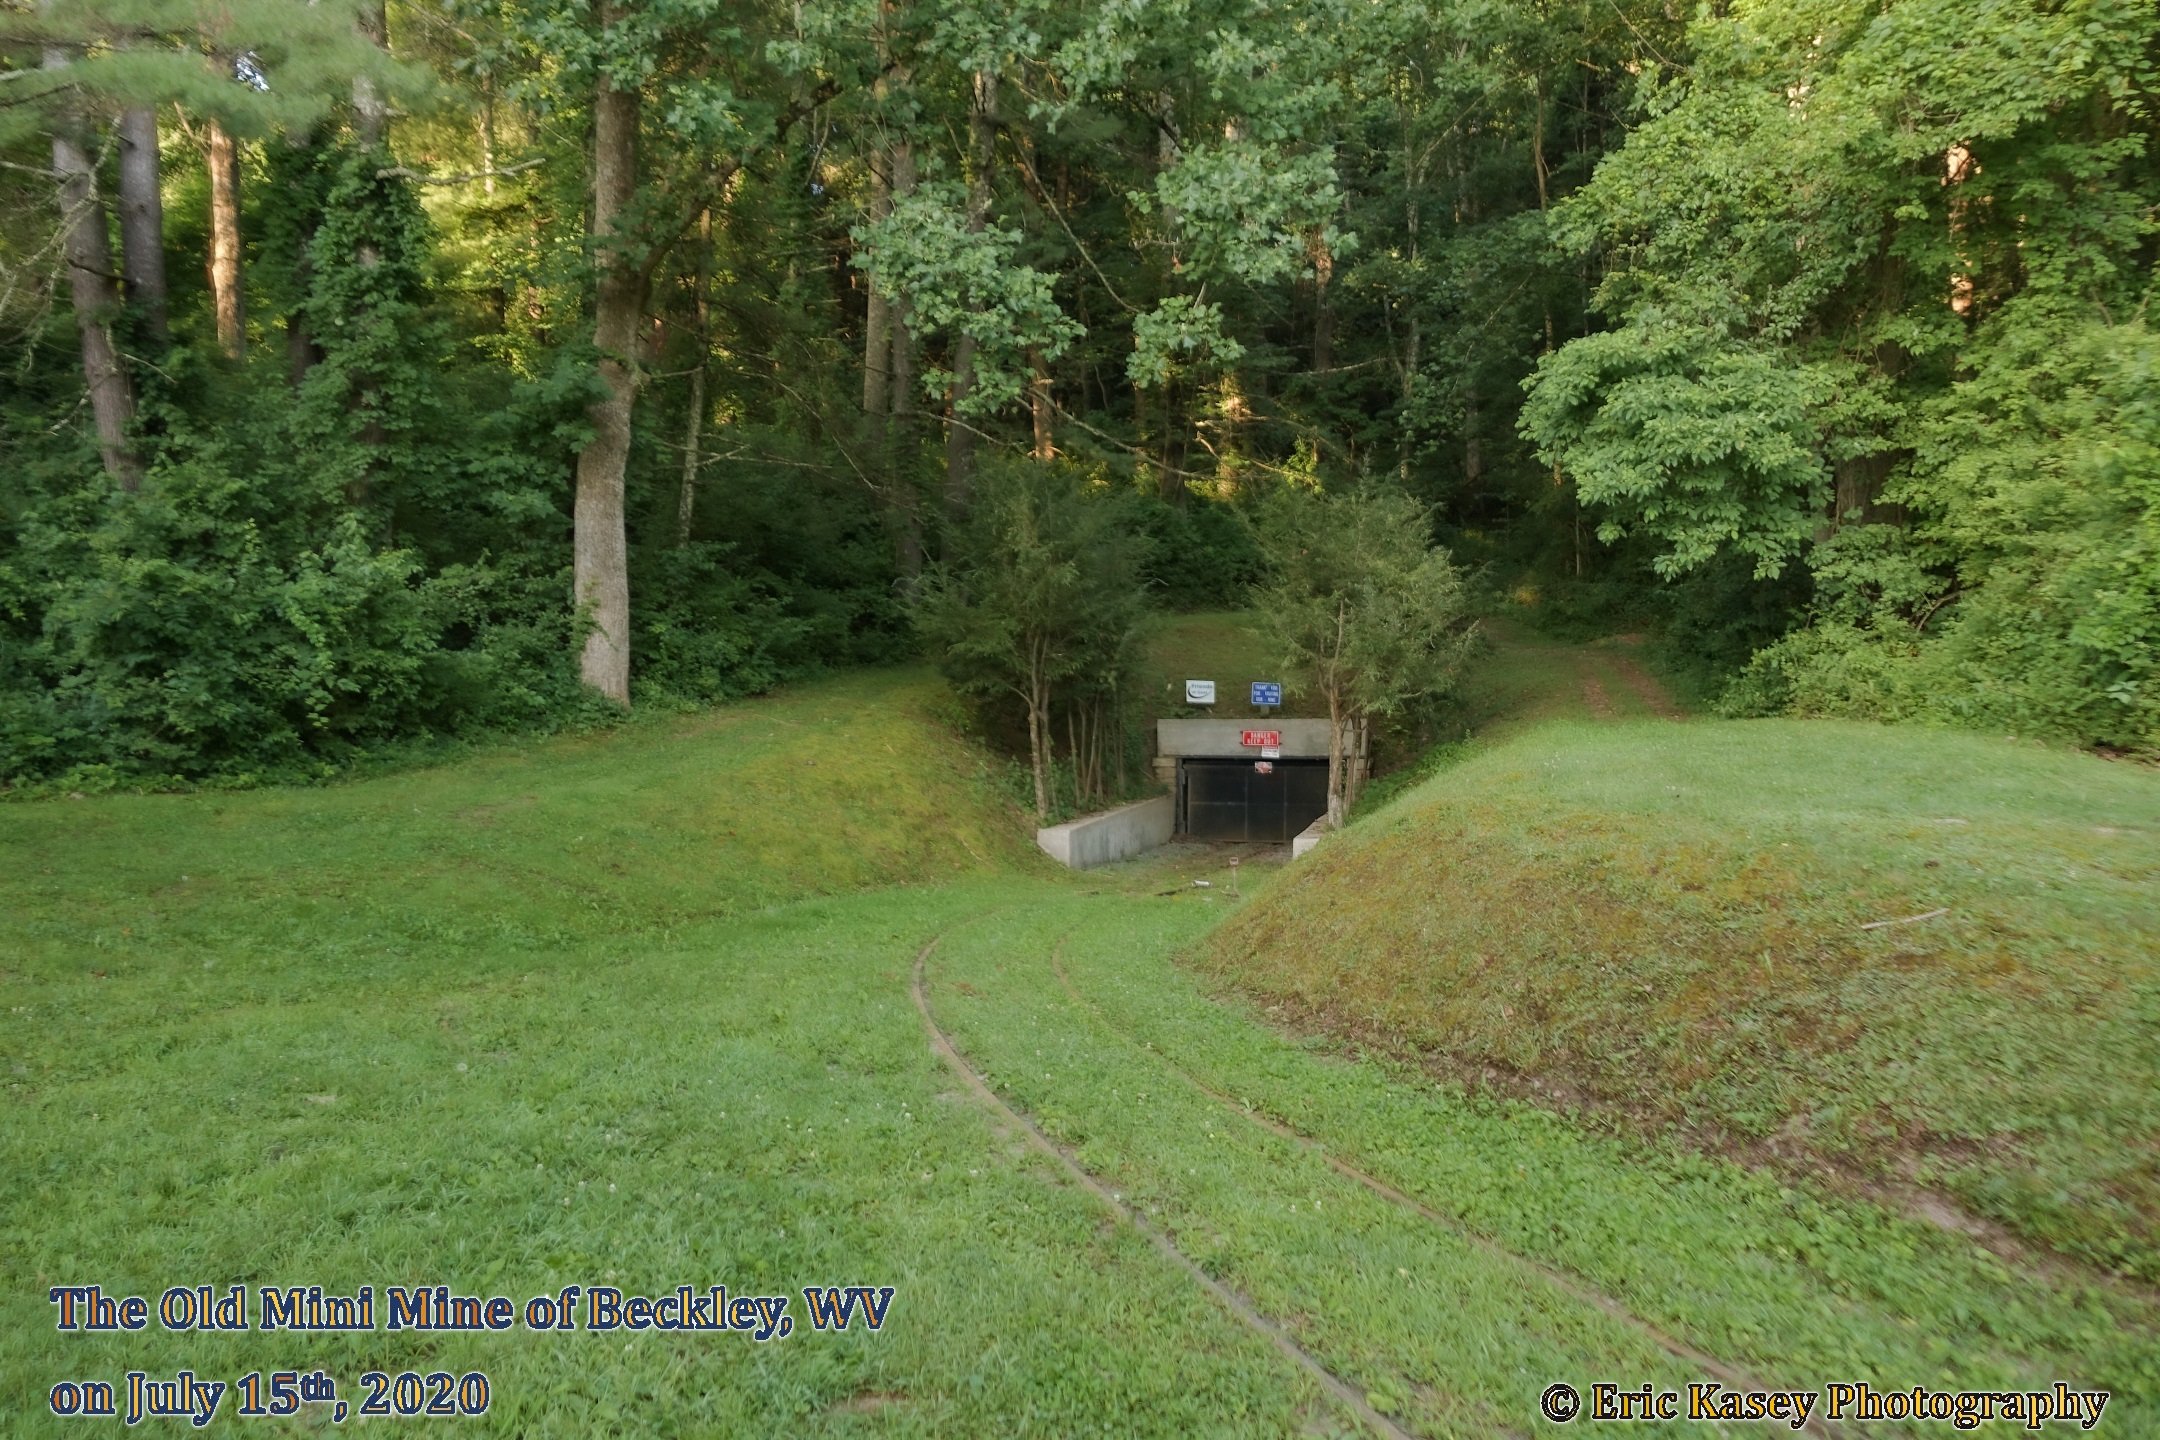 23 - The Old Mini Mine of Beckley, WV on July 15th, 2020.JPG